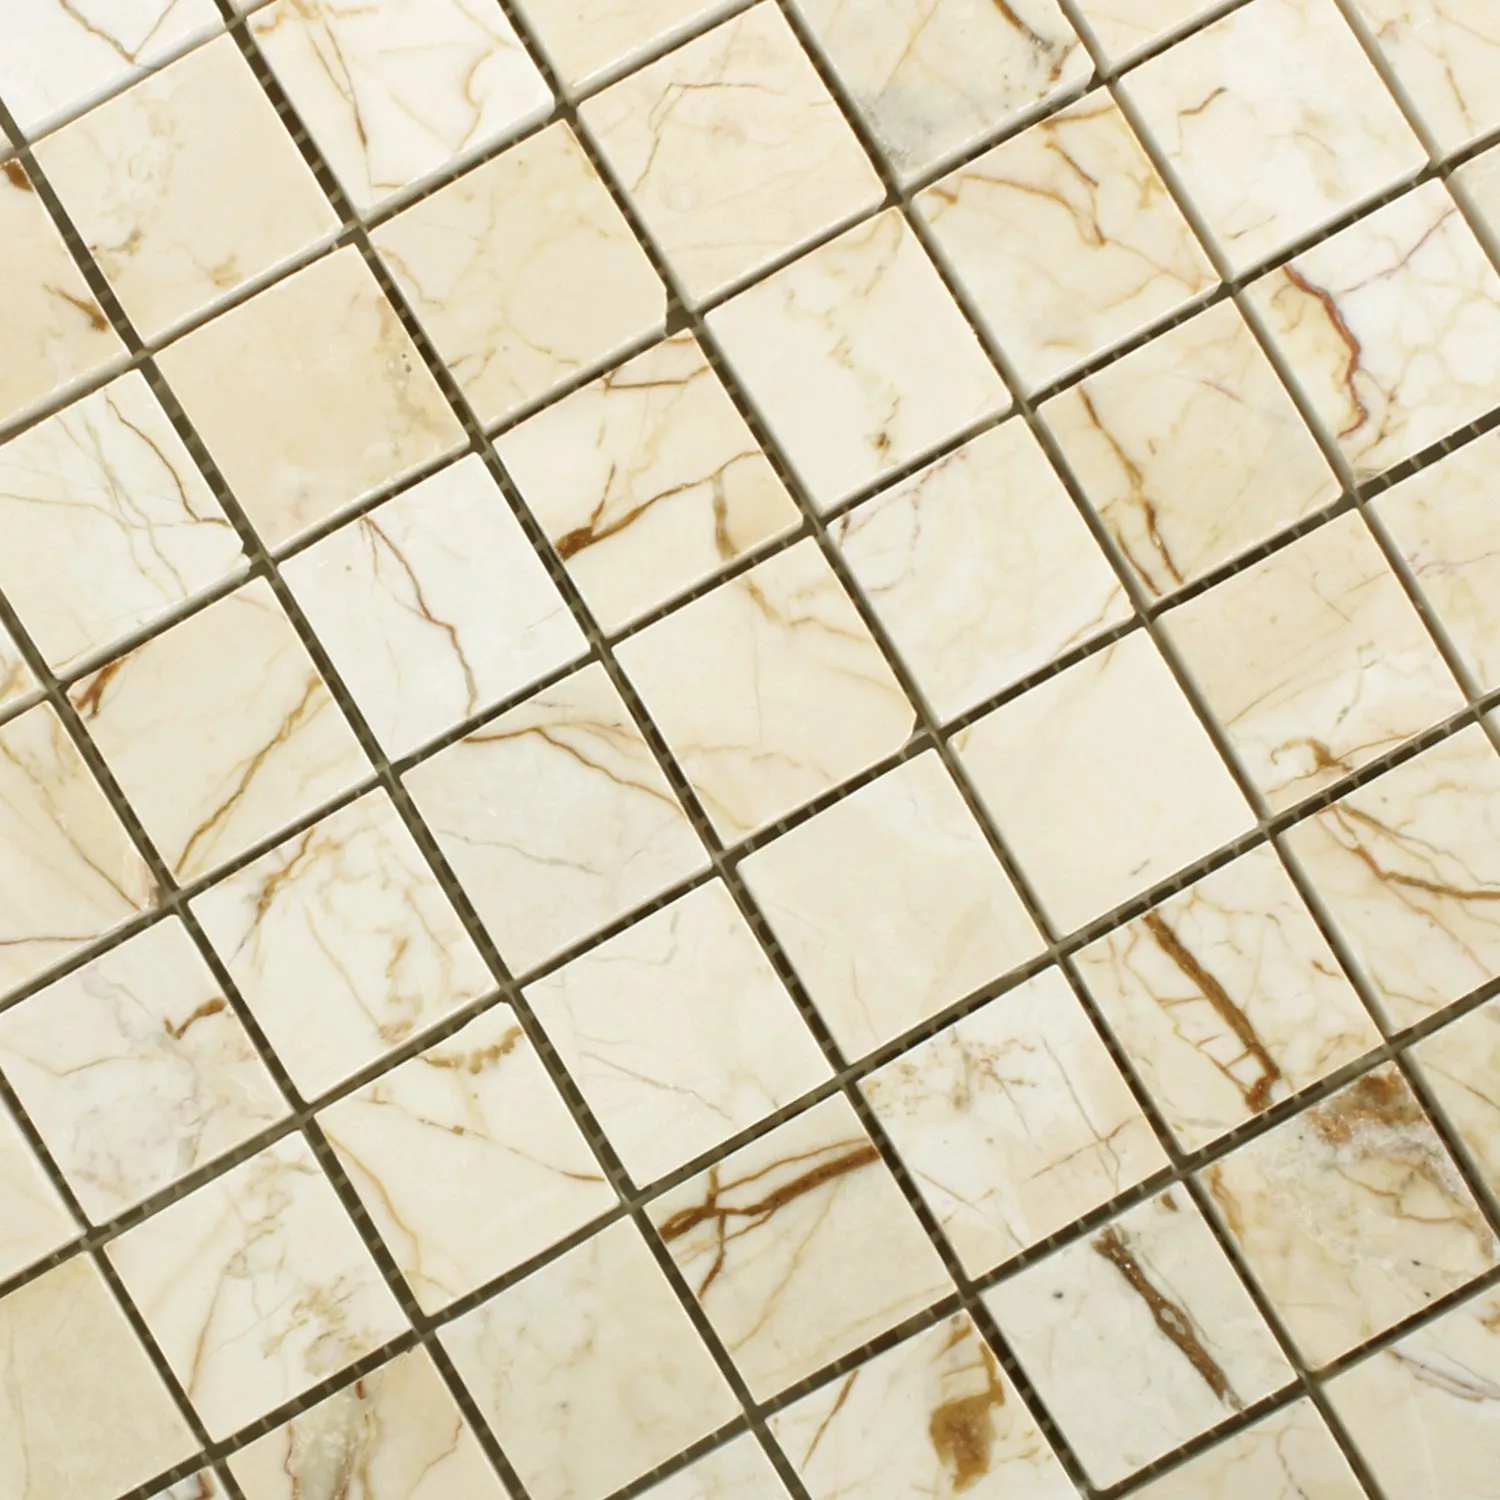 Mosaic Tiles Marble Golden Cream Polished